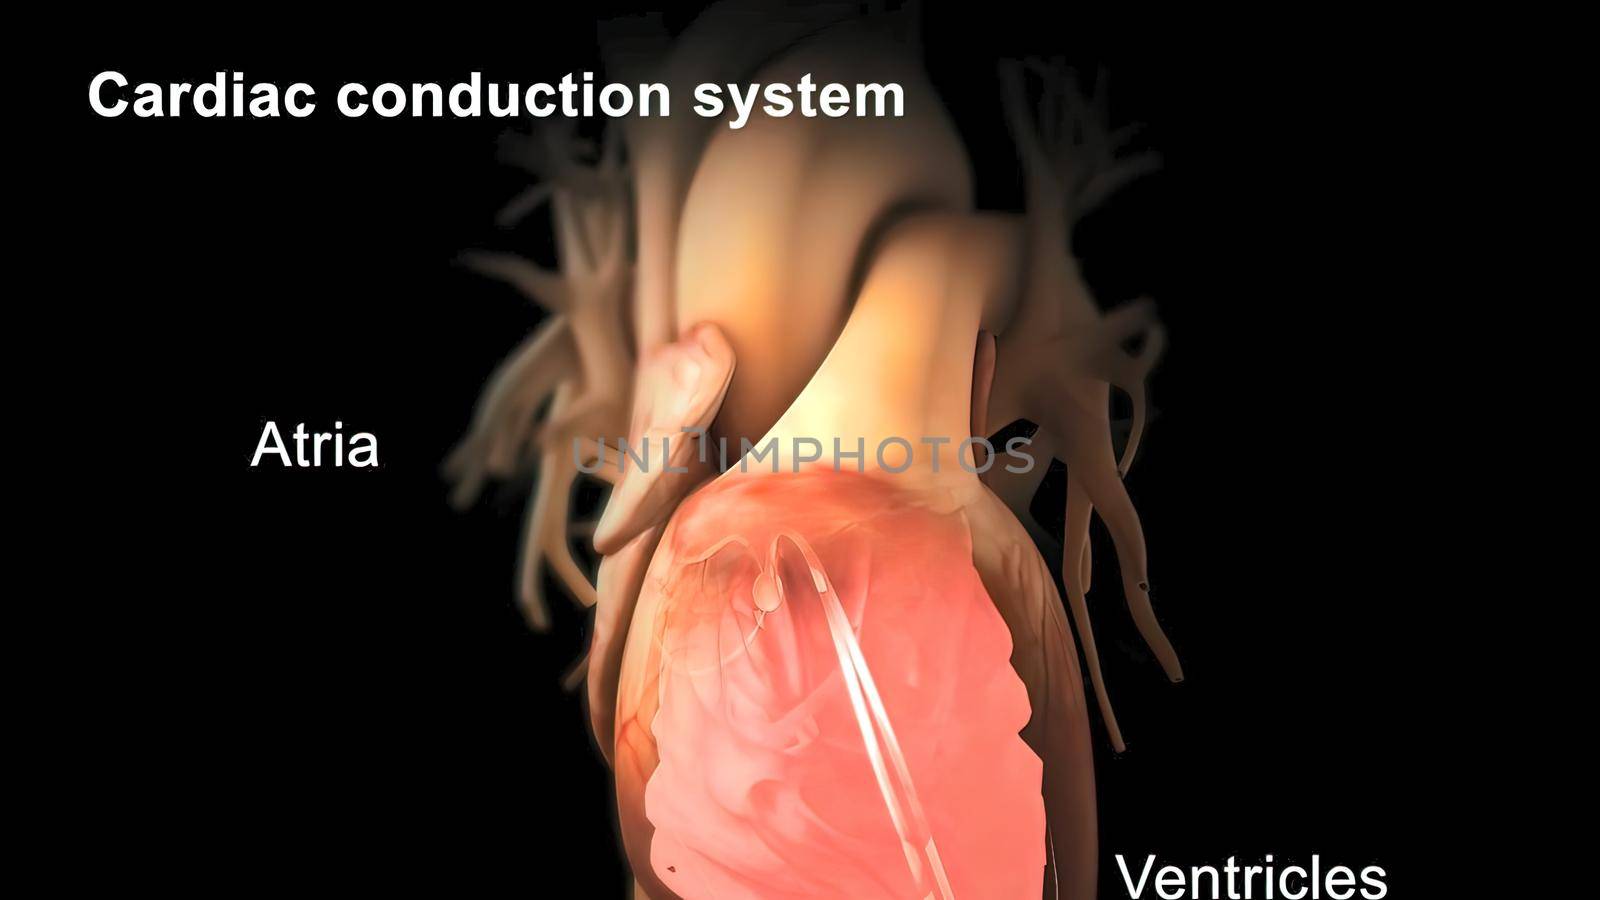 Catheter ablation is the treatment of arrhythmia with radio waves. 3D illustration